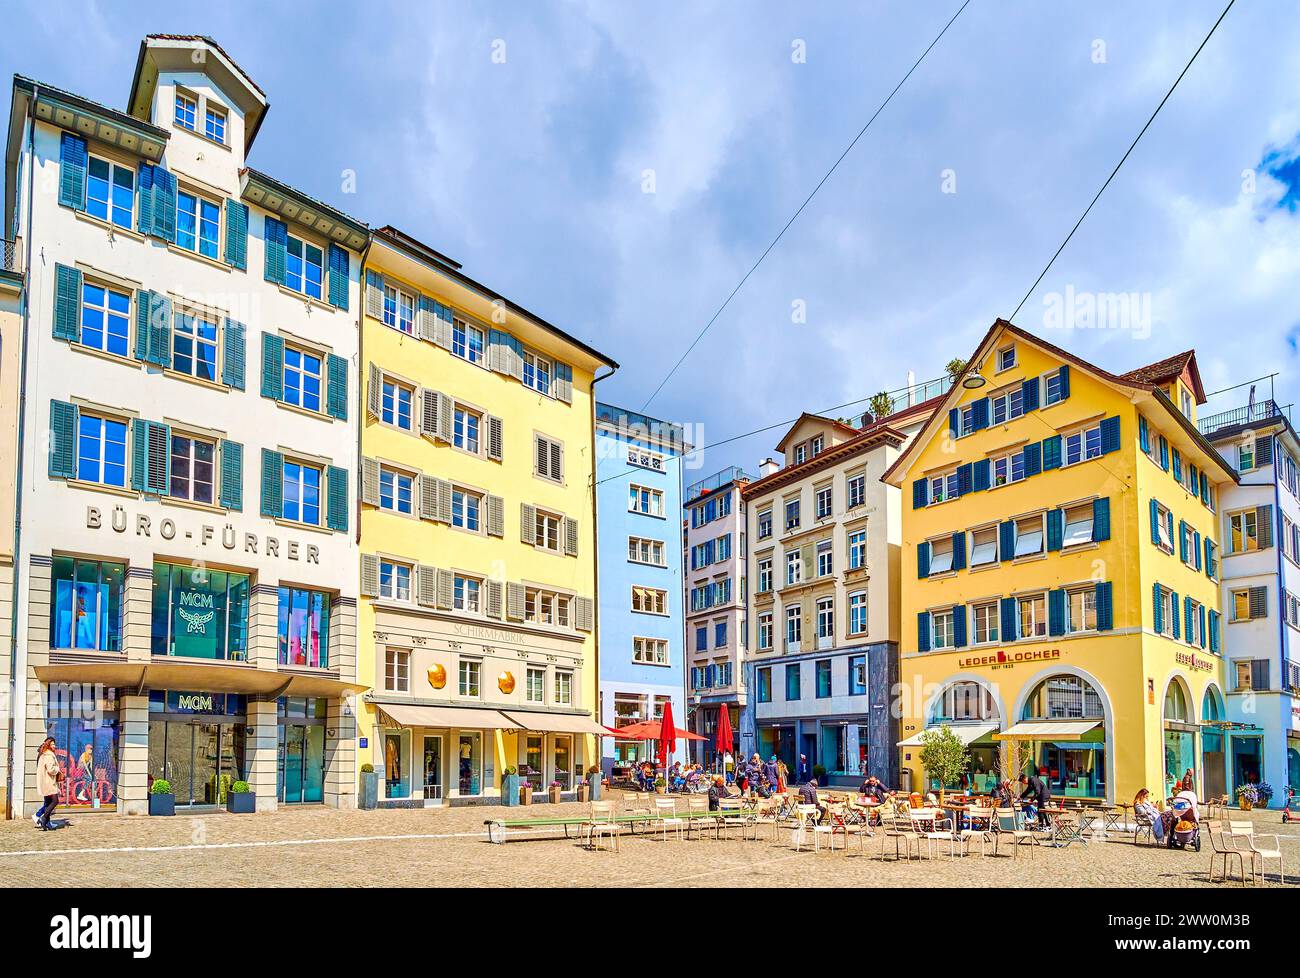 ZURICH, SWITZERLAND - APRIL 3, 2022: Munsterhof Square's medieval townhouses with atmospheric restaurant outdoor seating, on April 3 in Zurich, Switze Stock Photo